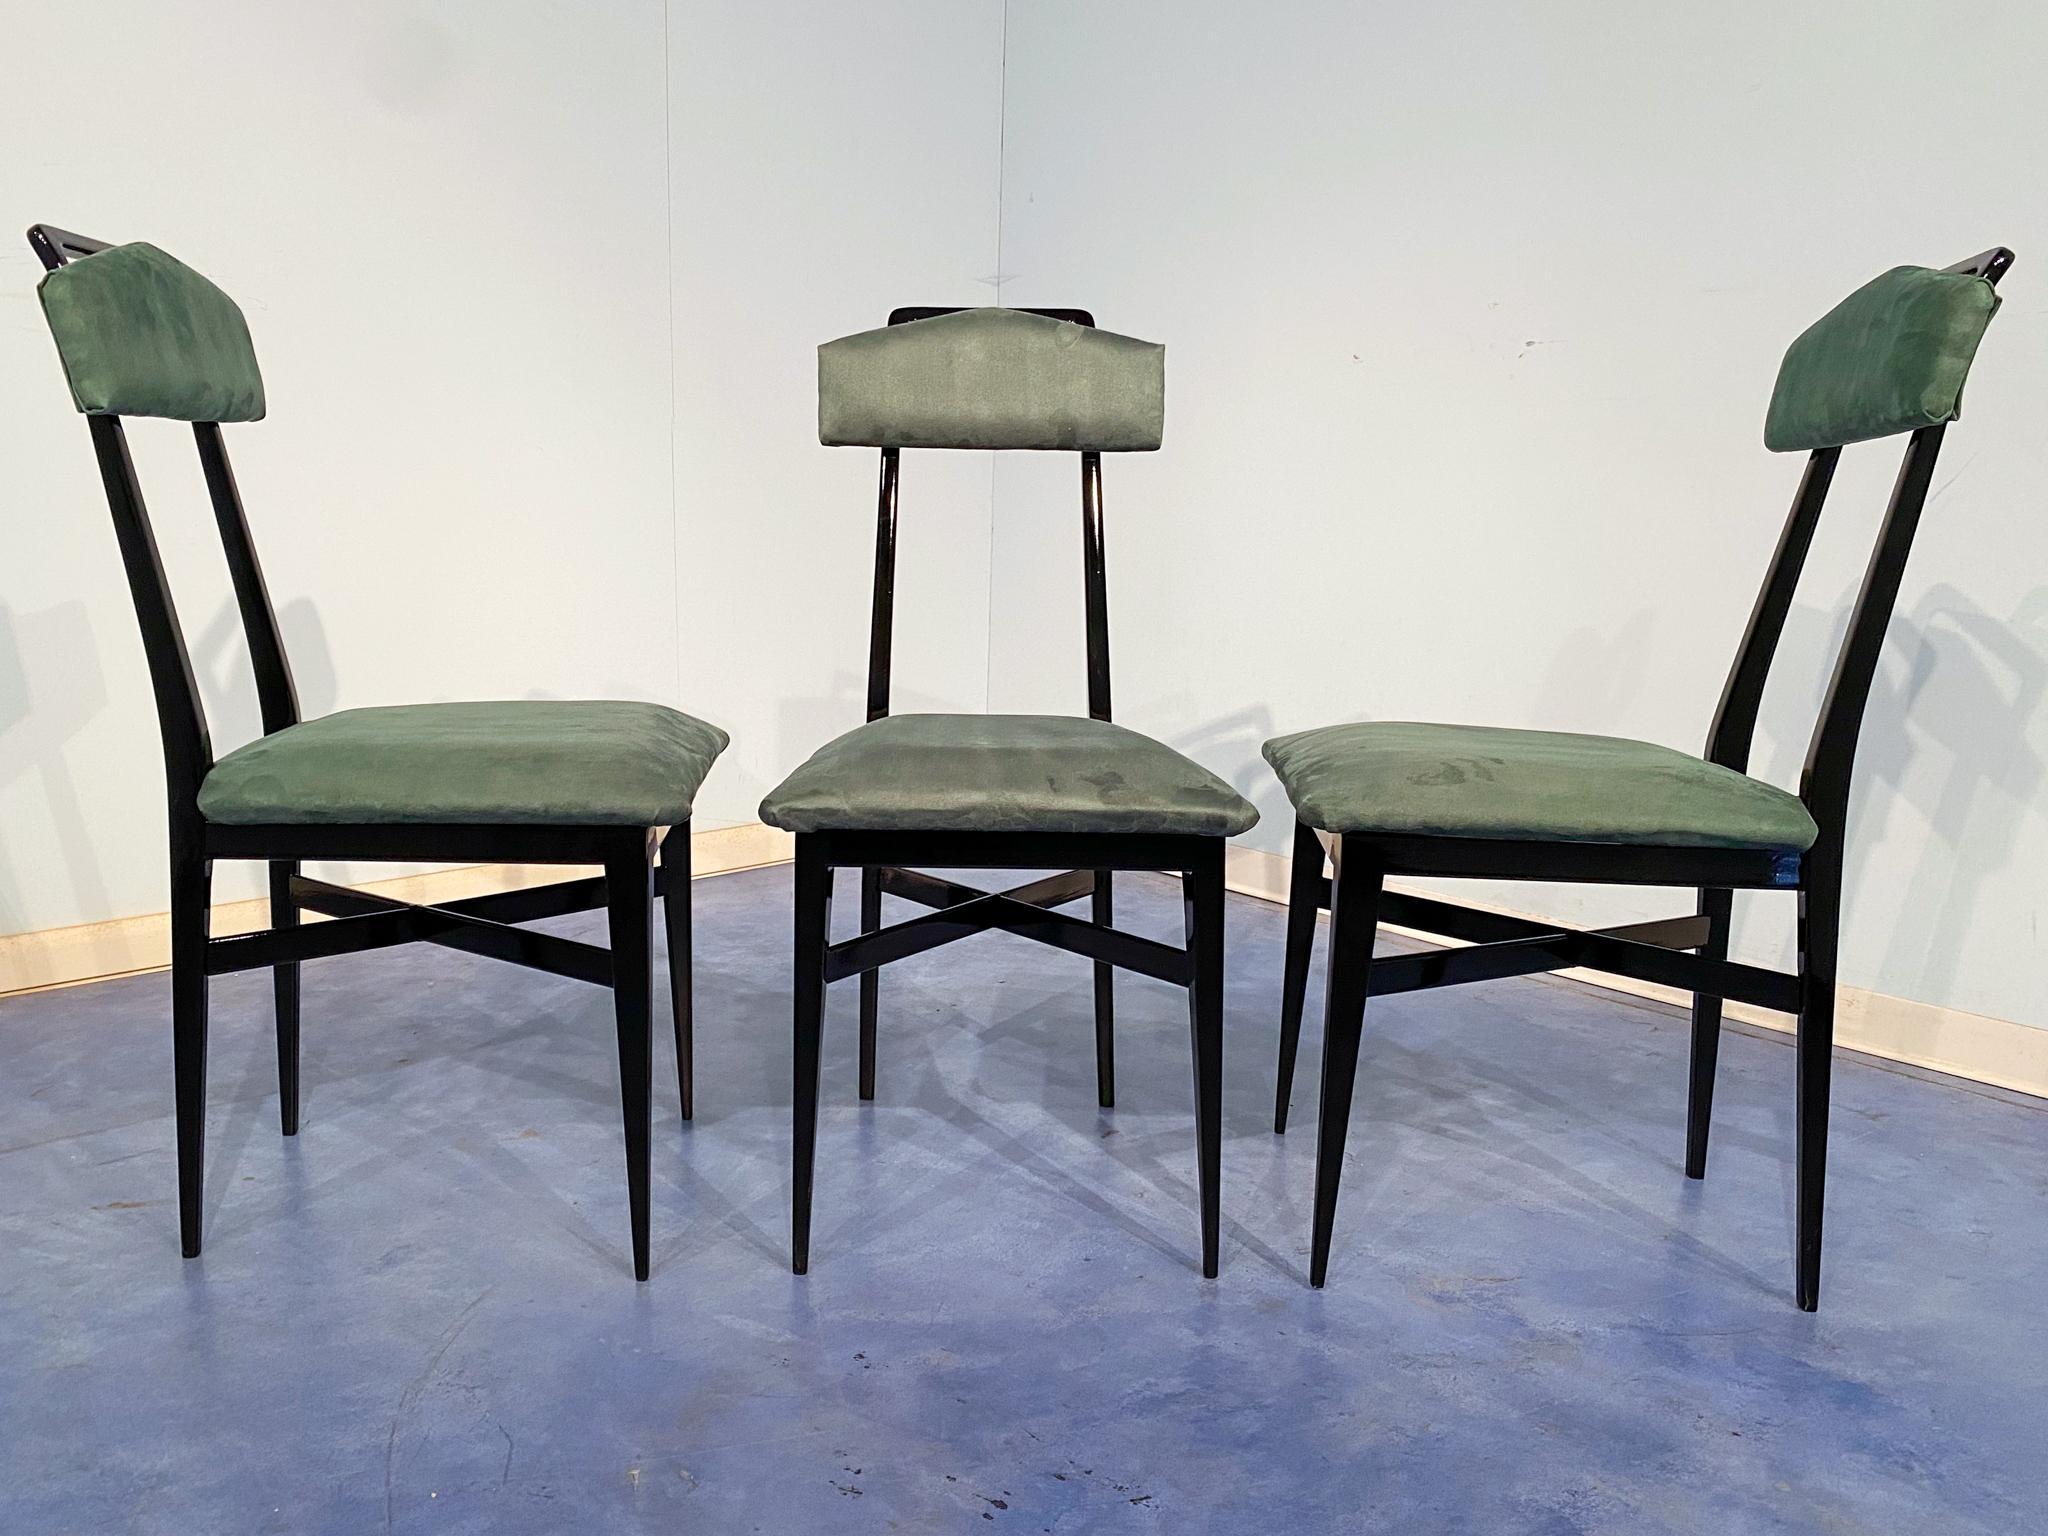 Italian Mid-Century Black and Green Color Dining Chairs, Set of Six, 1950s For Sale 2